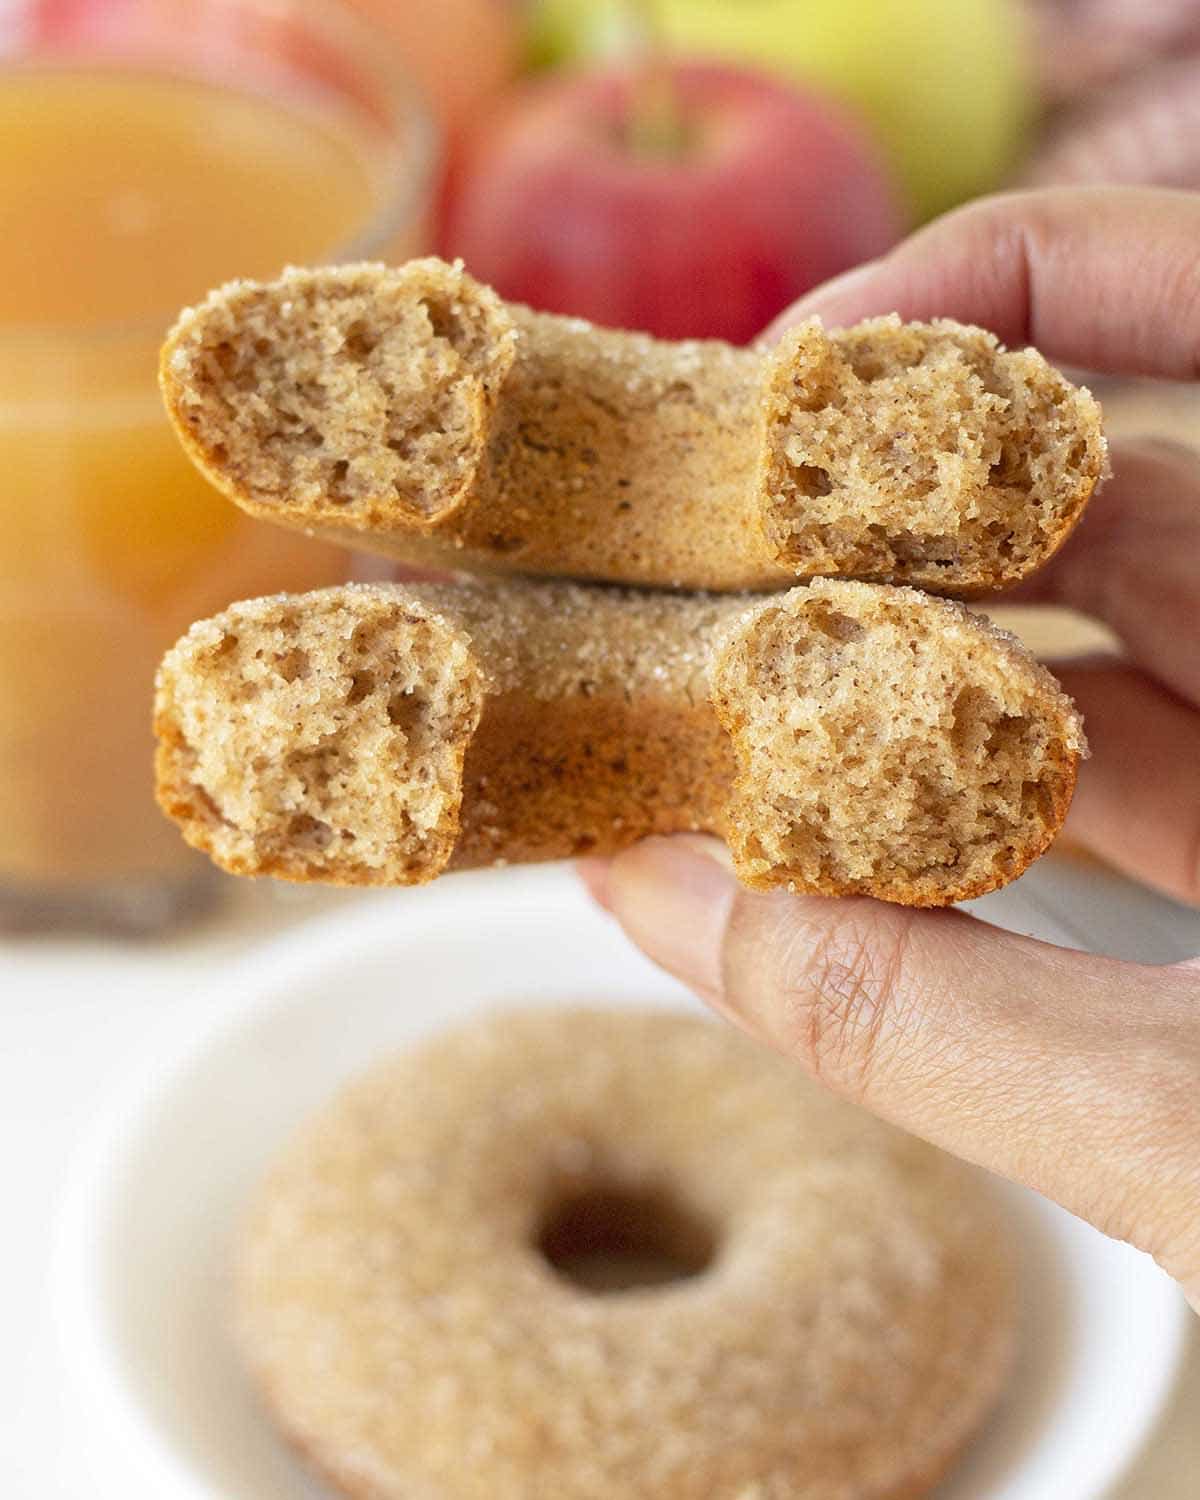 A hand holding half of a vegan and half of a vegan gluten free apple cider donut to show the inner fluffy textures.